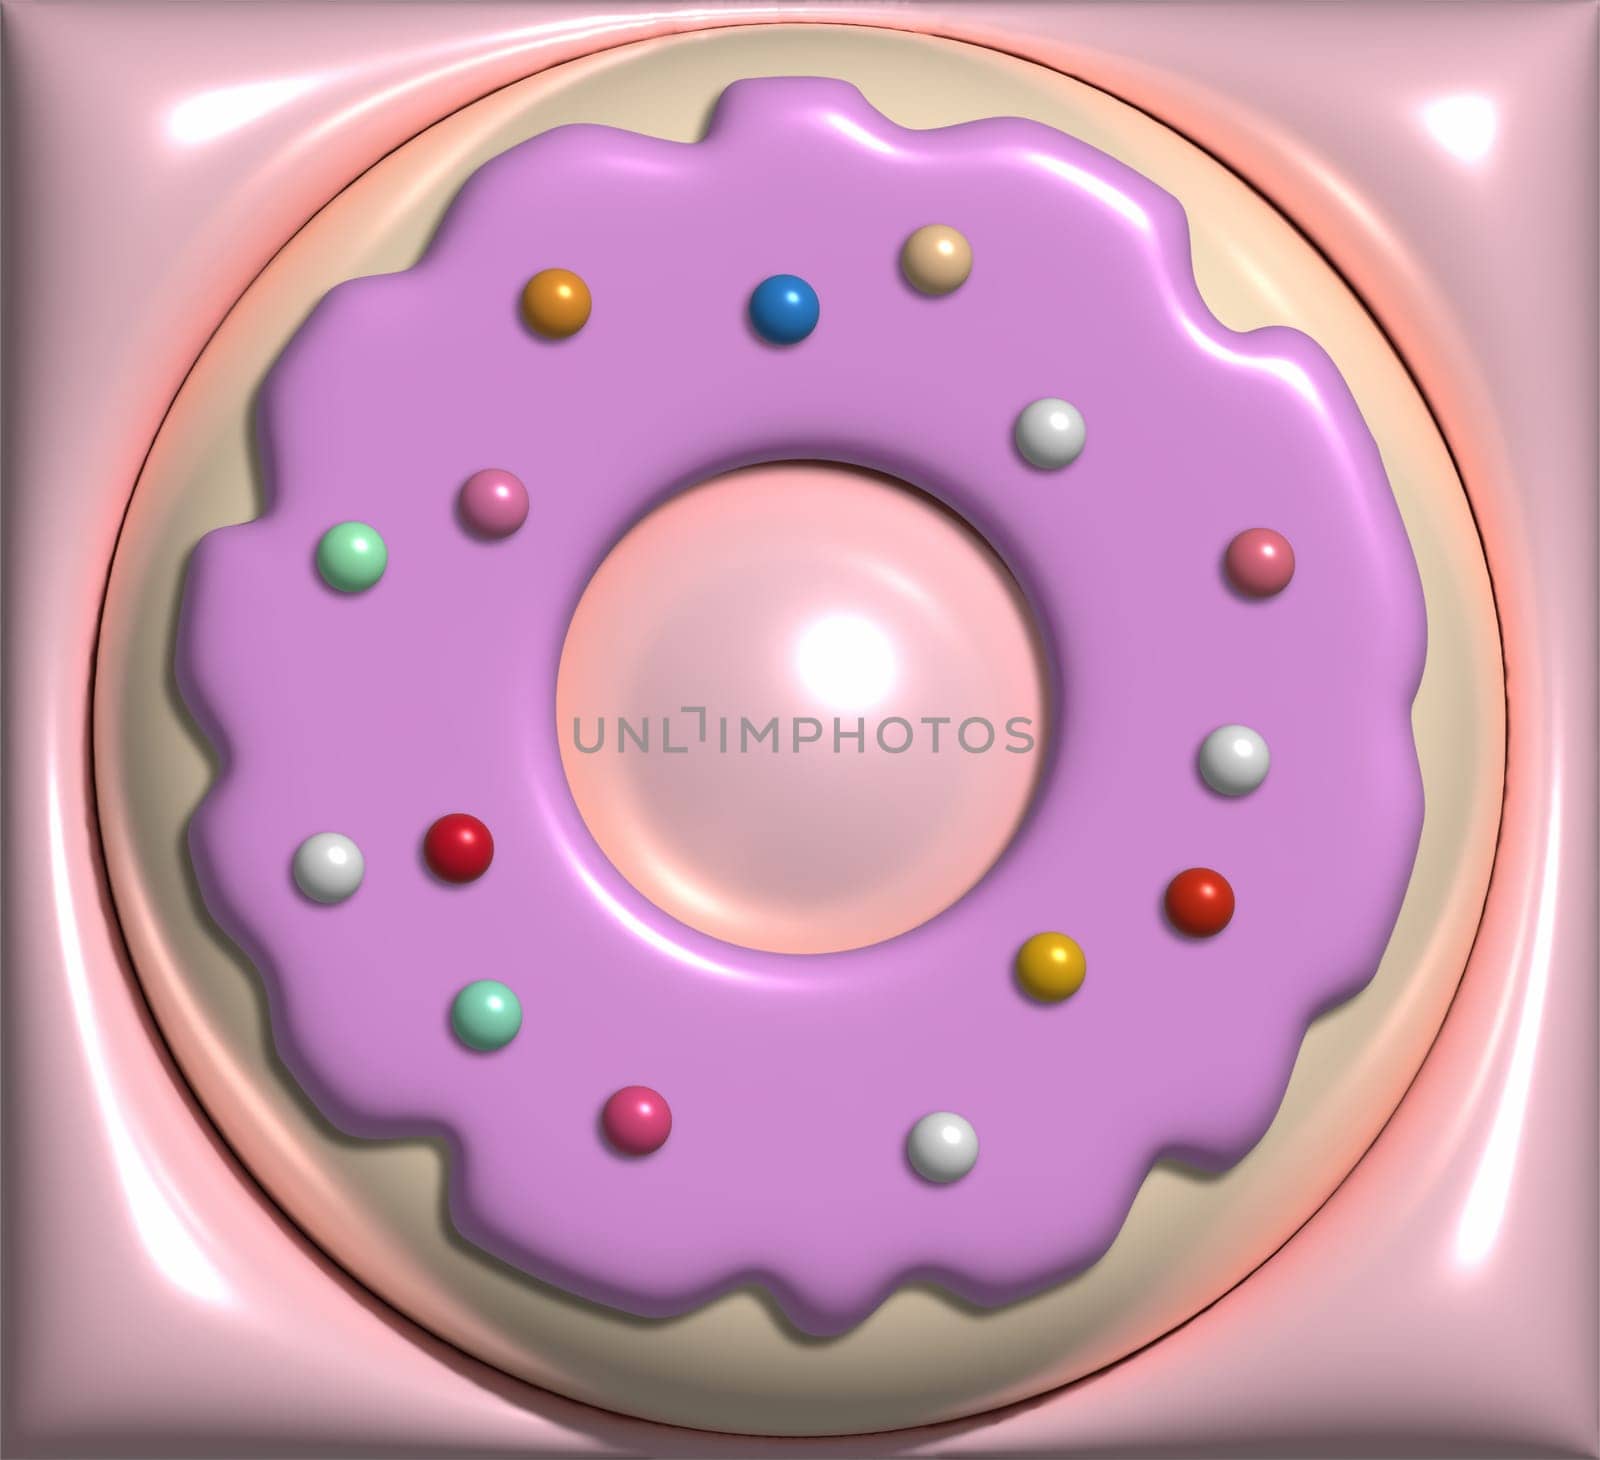 Round donut with pink icing and sprinkles, 3D rendering illustration by ndanko